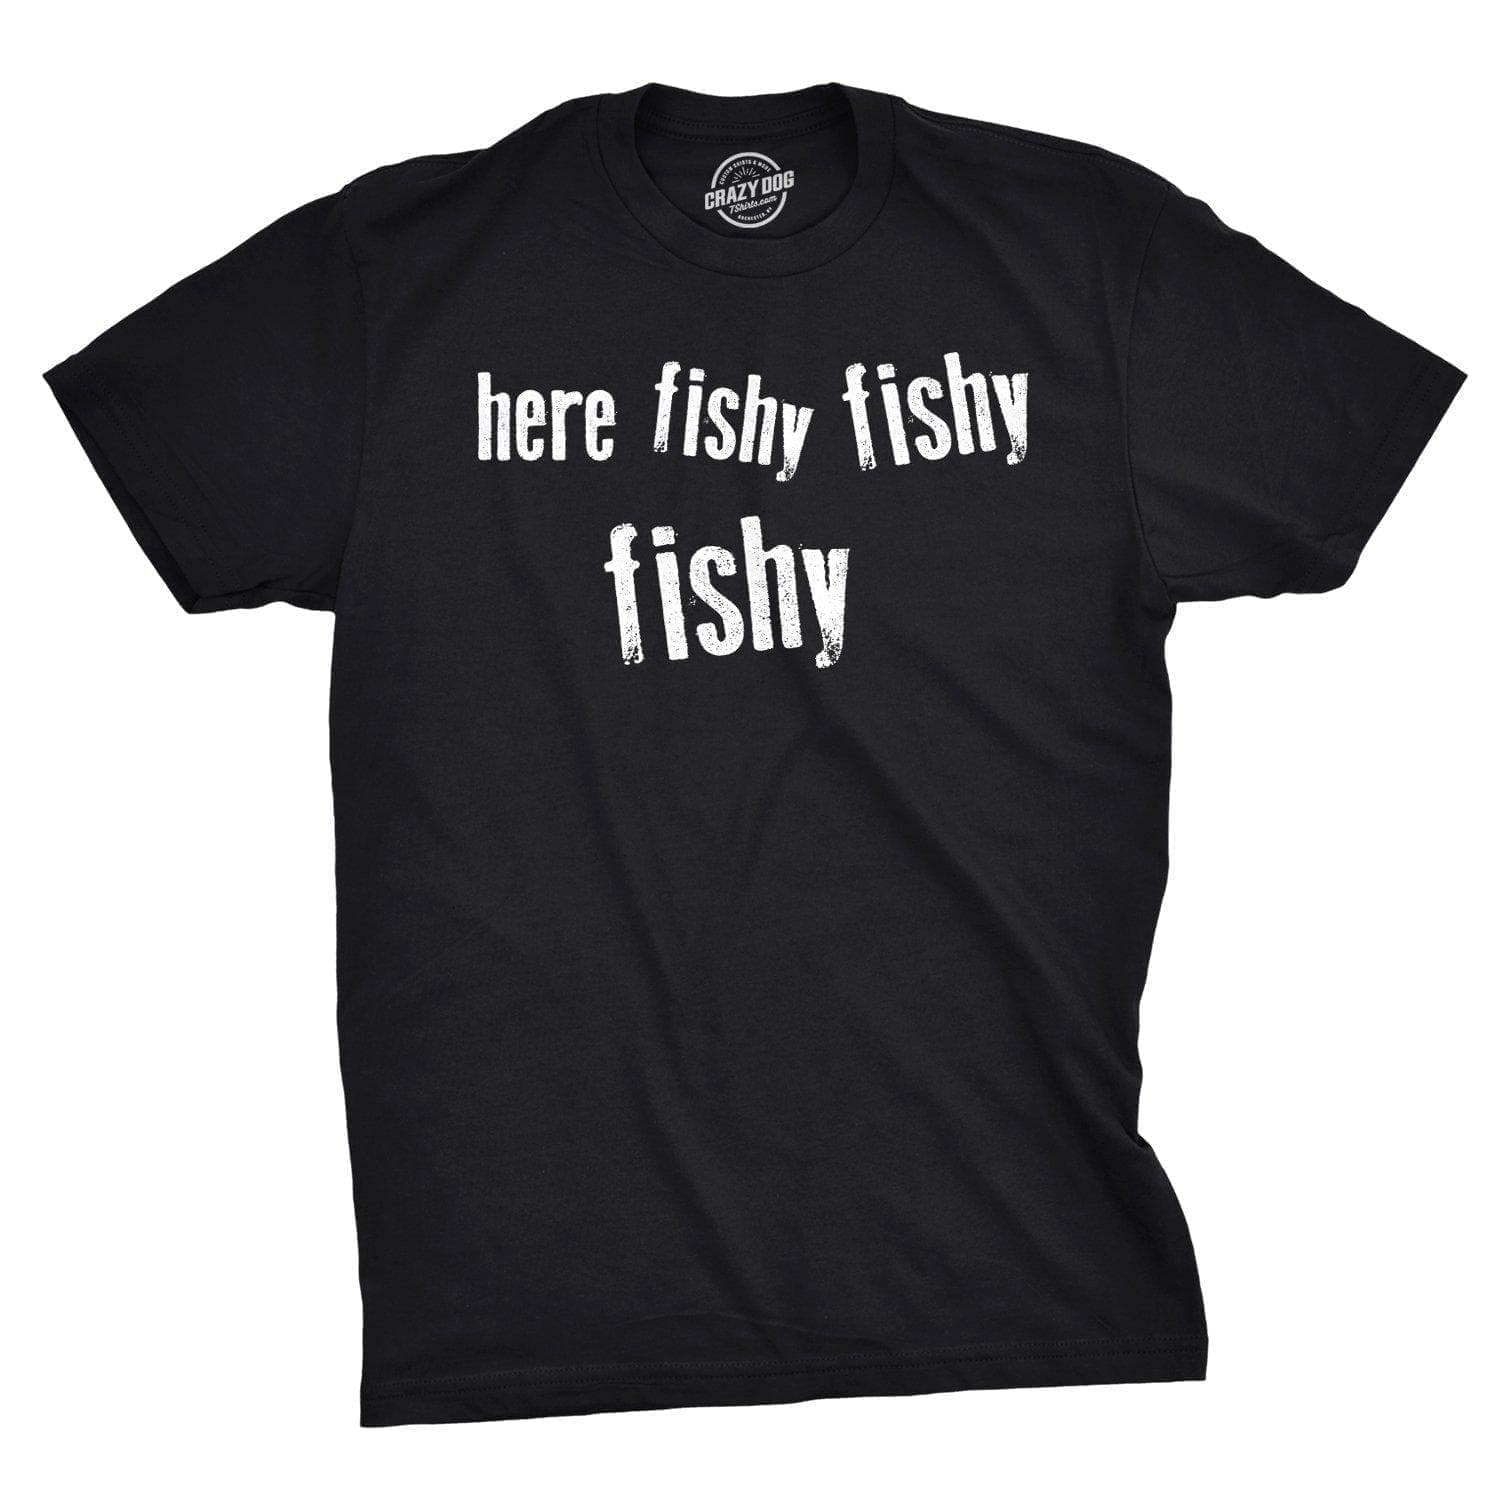 Fishing Makes Me Happy Fish Shirt for Adults and Kids T-Shirt